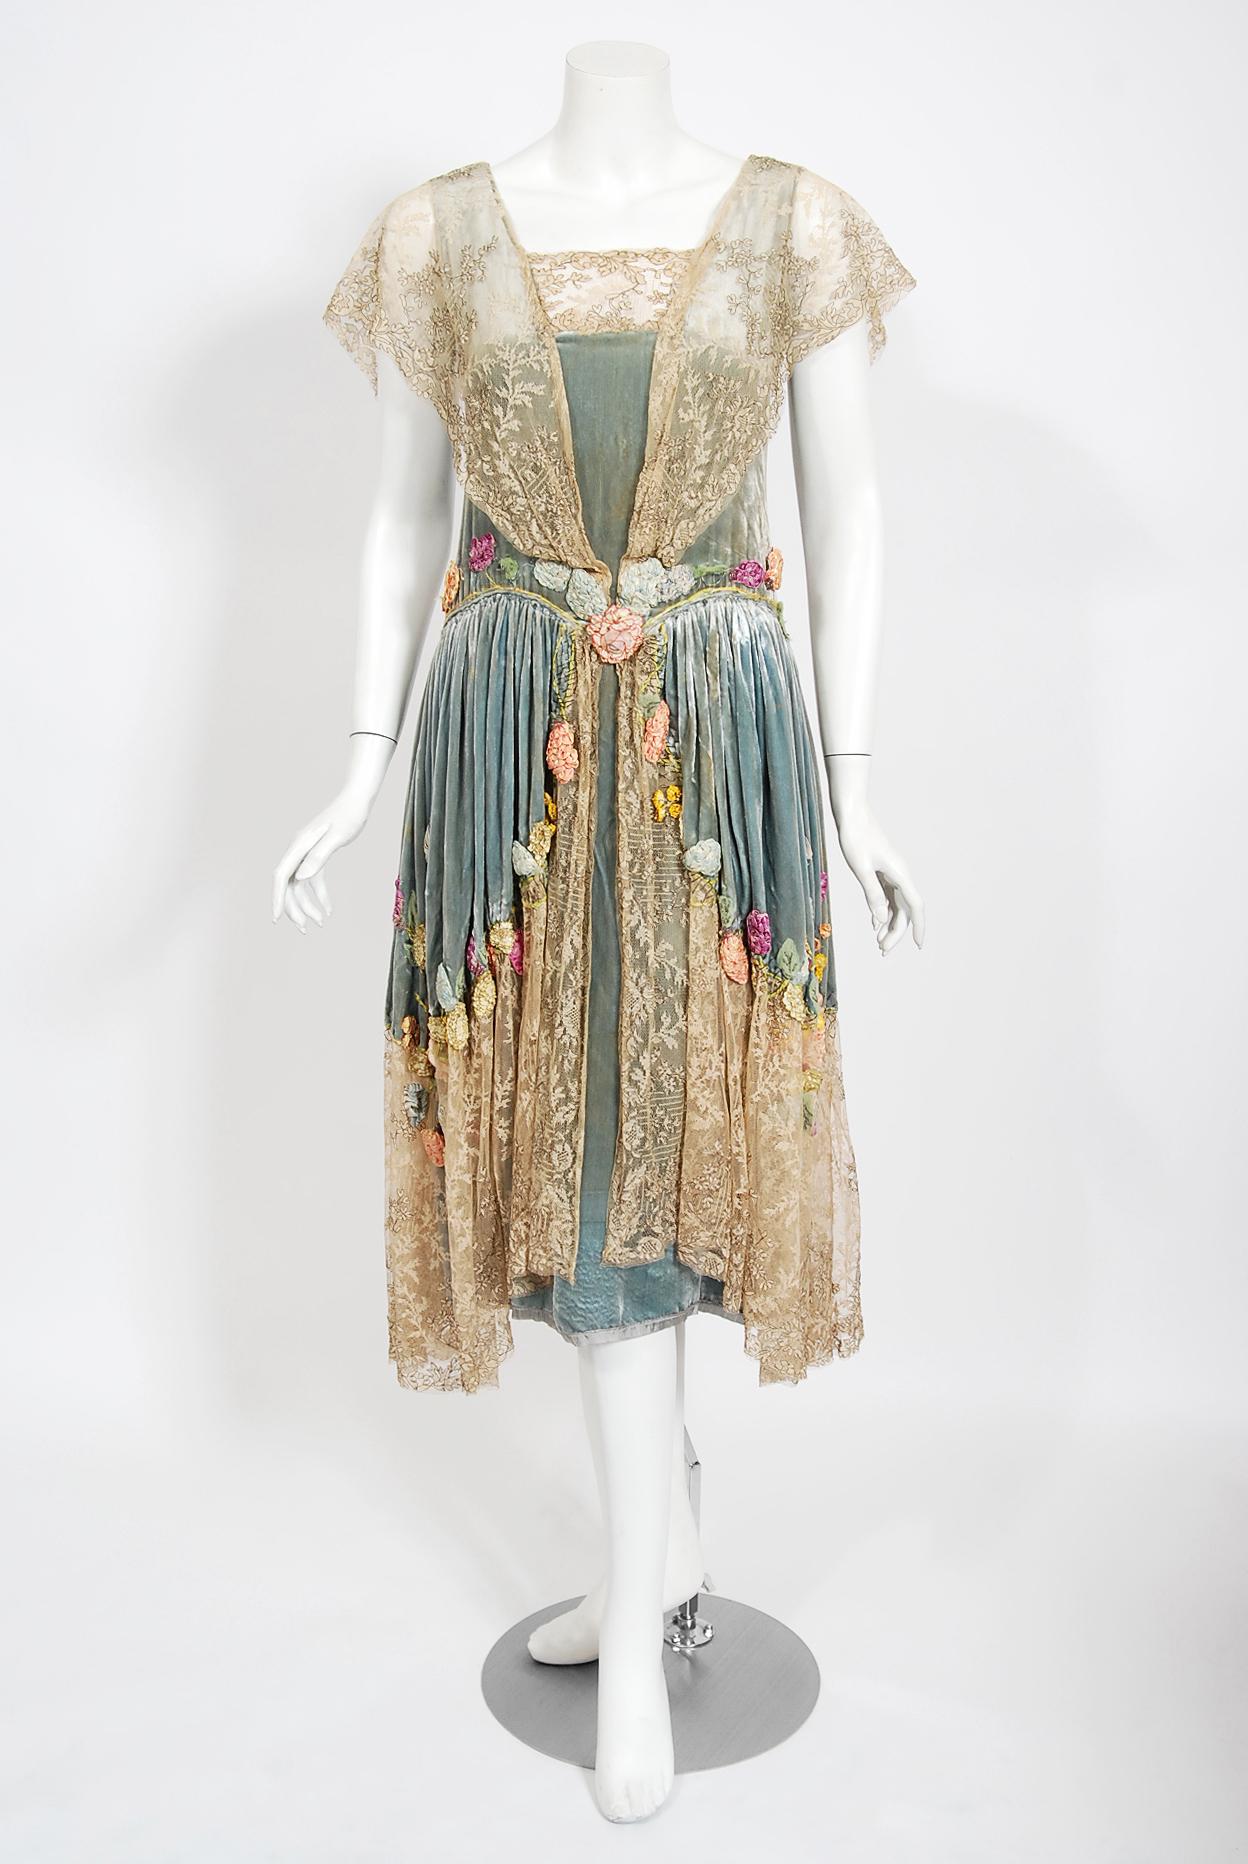 A magnificent and incredibly rare Sadie Nemser Couture velvet and lace 'robe de style' dress dating back to 1924. This garment took my breath away from the moment I saw it. It's truly wearable masterpiece. Mrs. Sadie Nemser only sold her unique